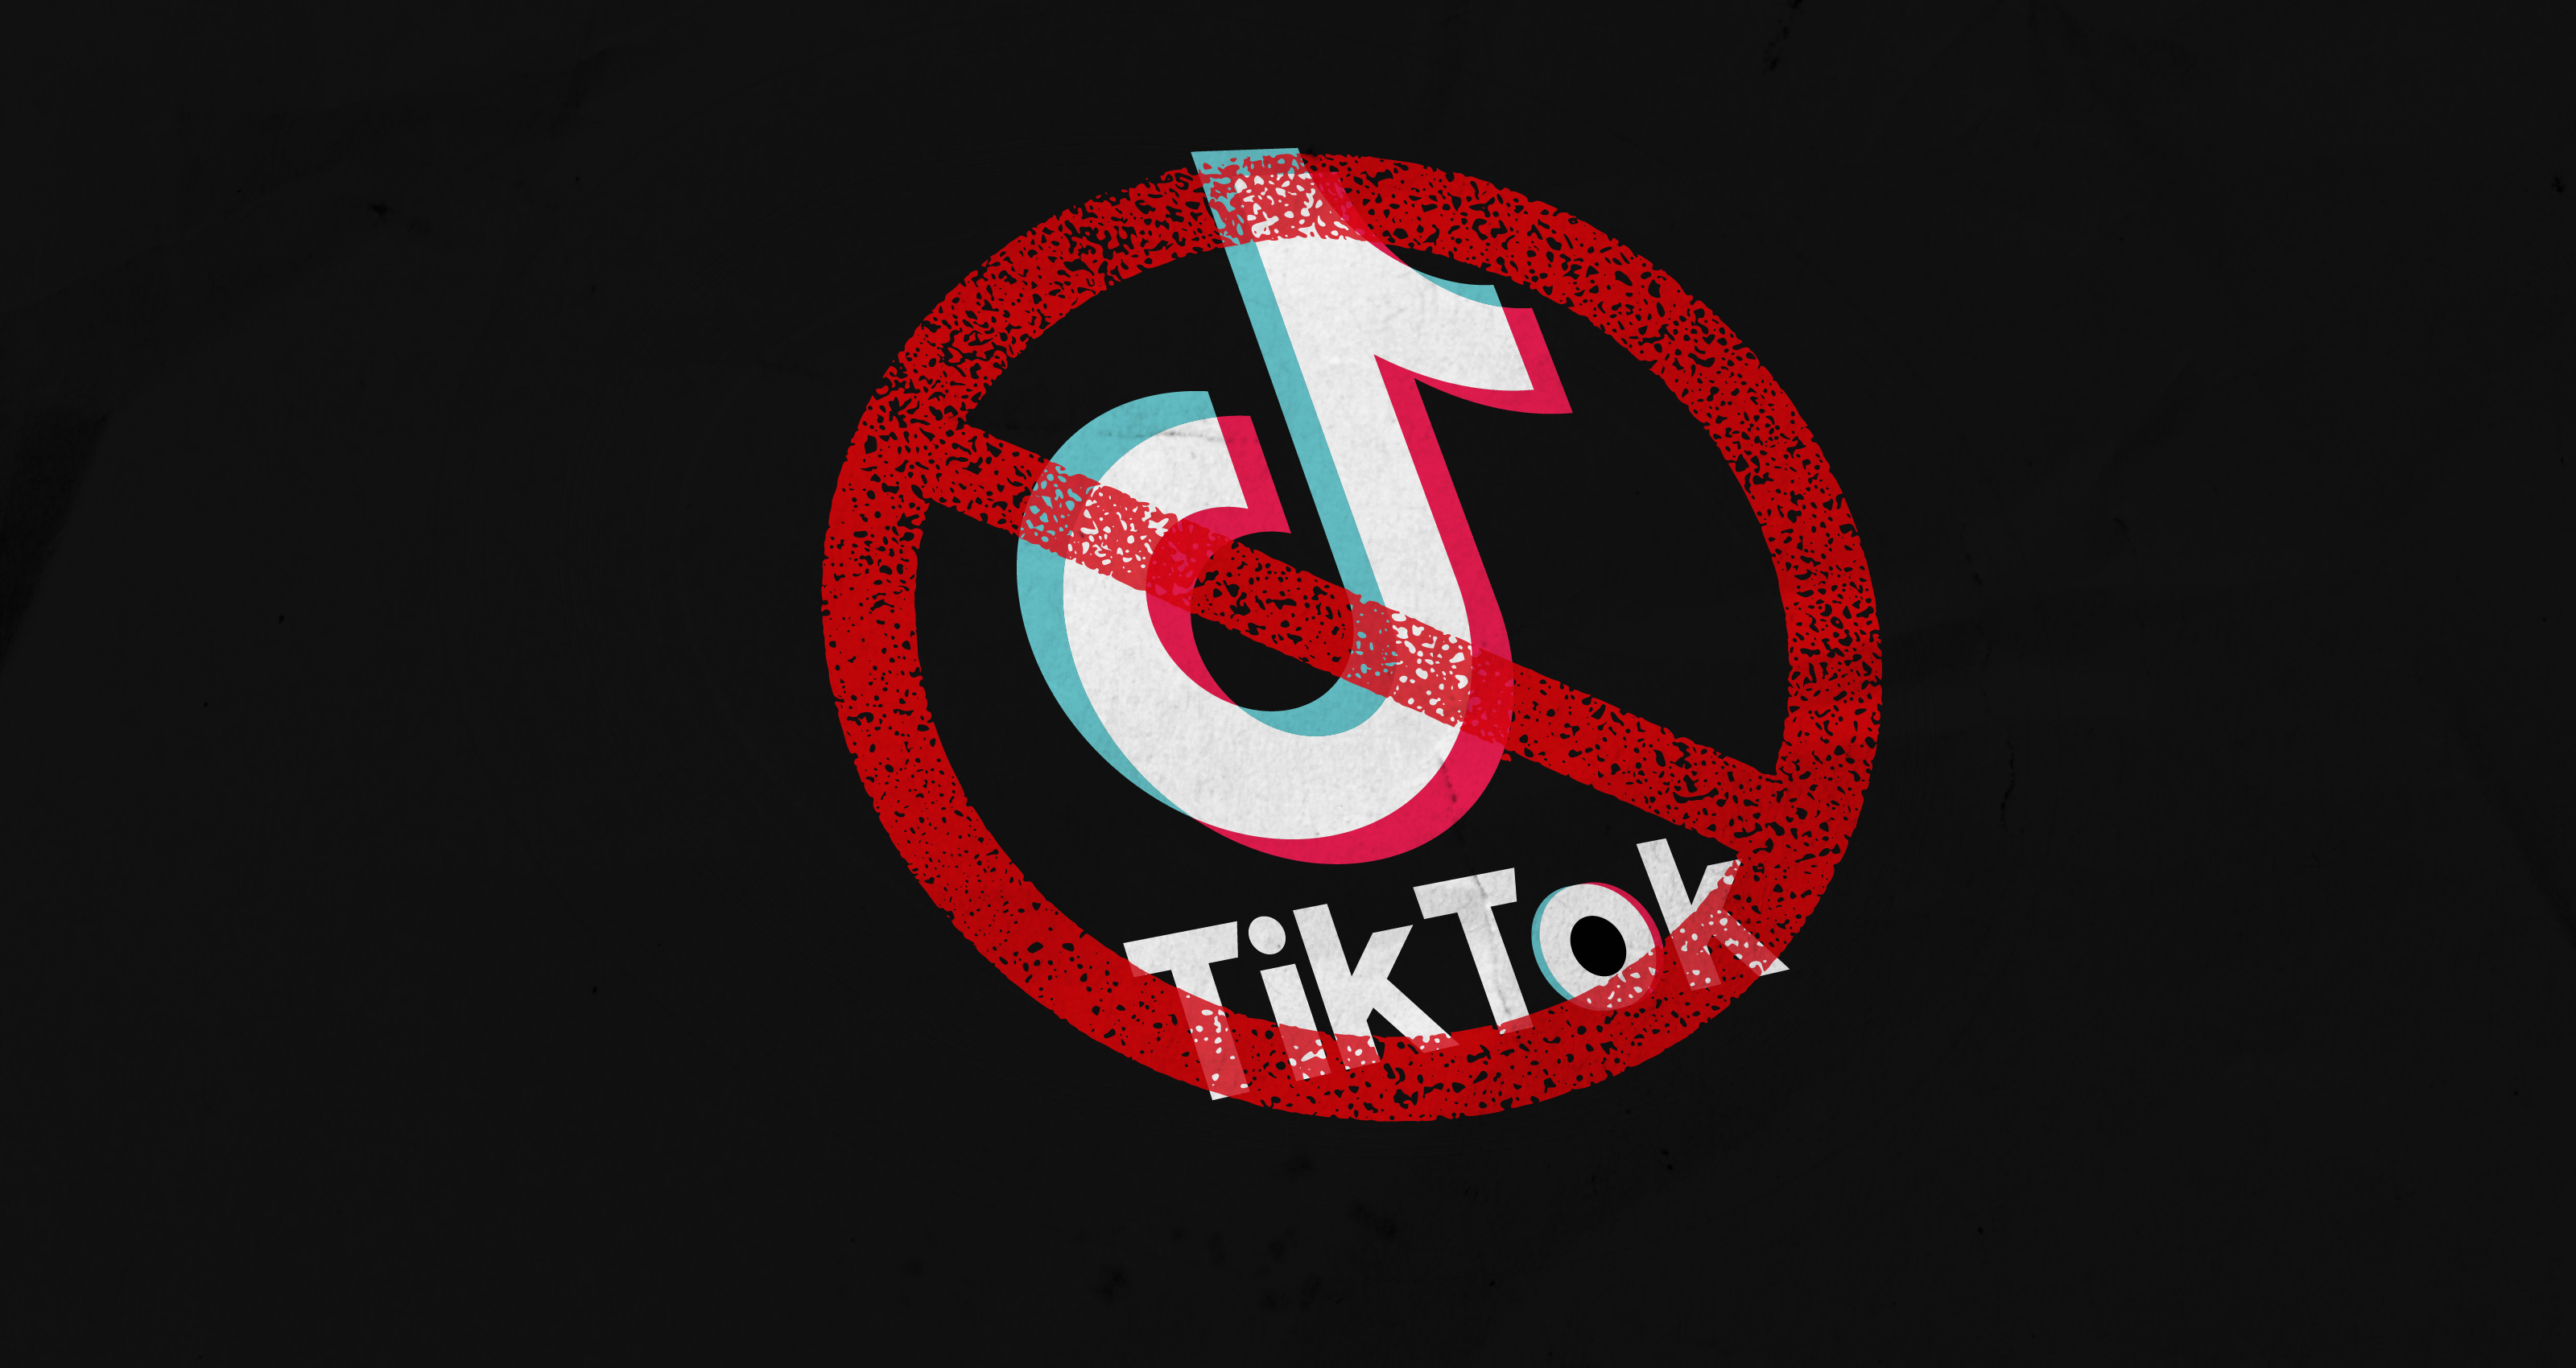 TikTok ban: What's going on with the proposed bill in Congress